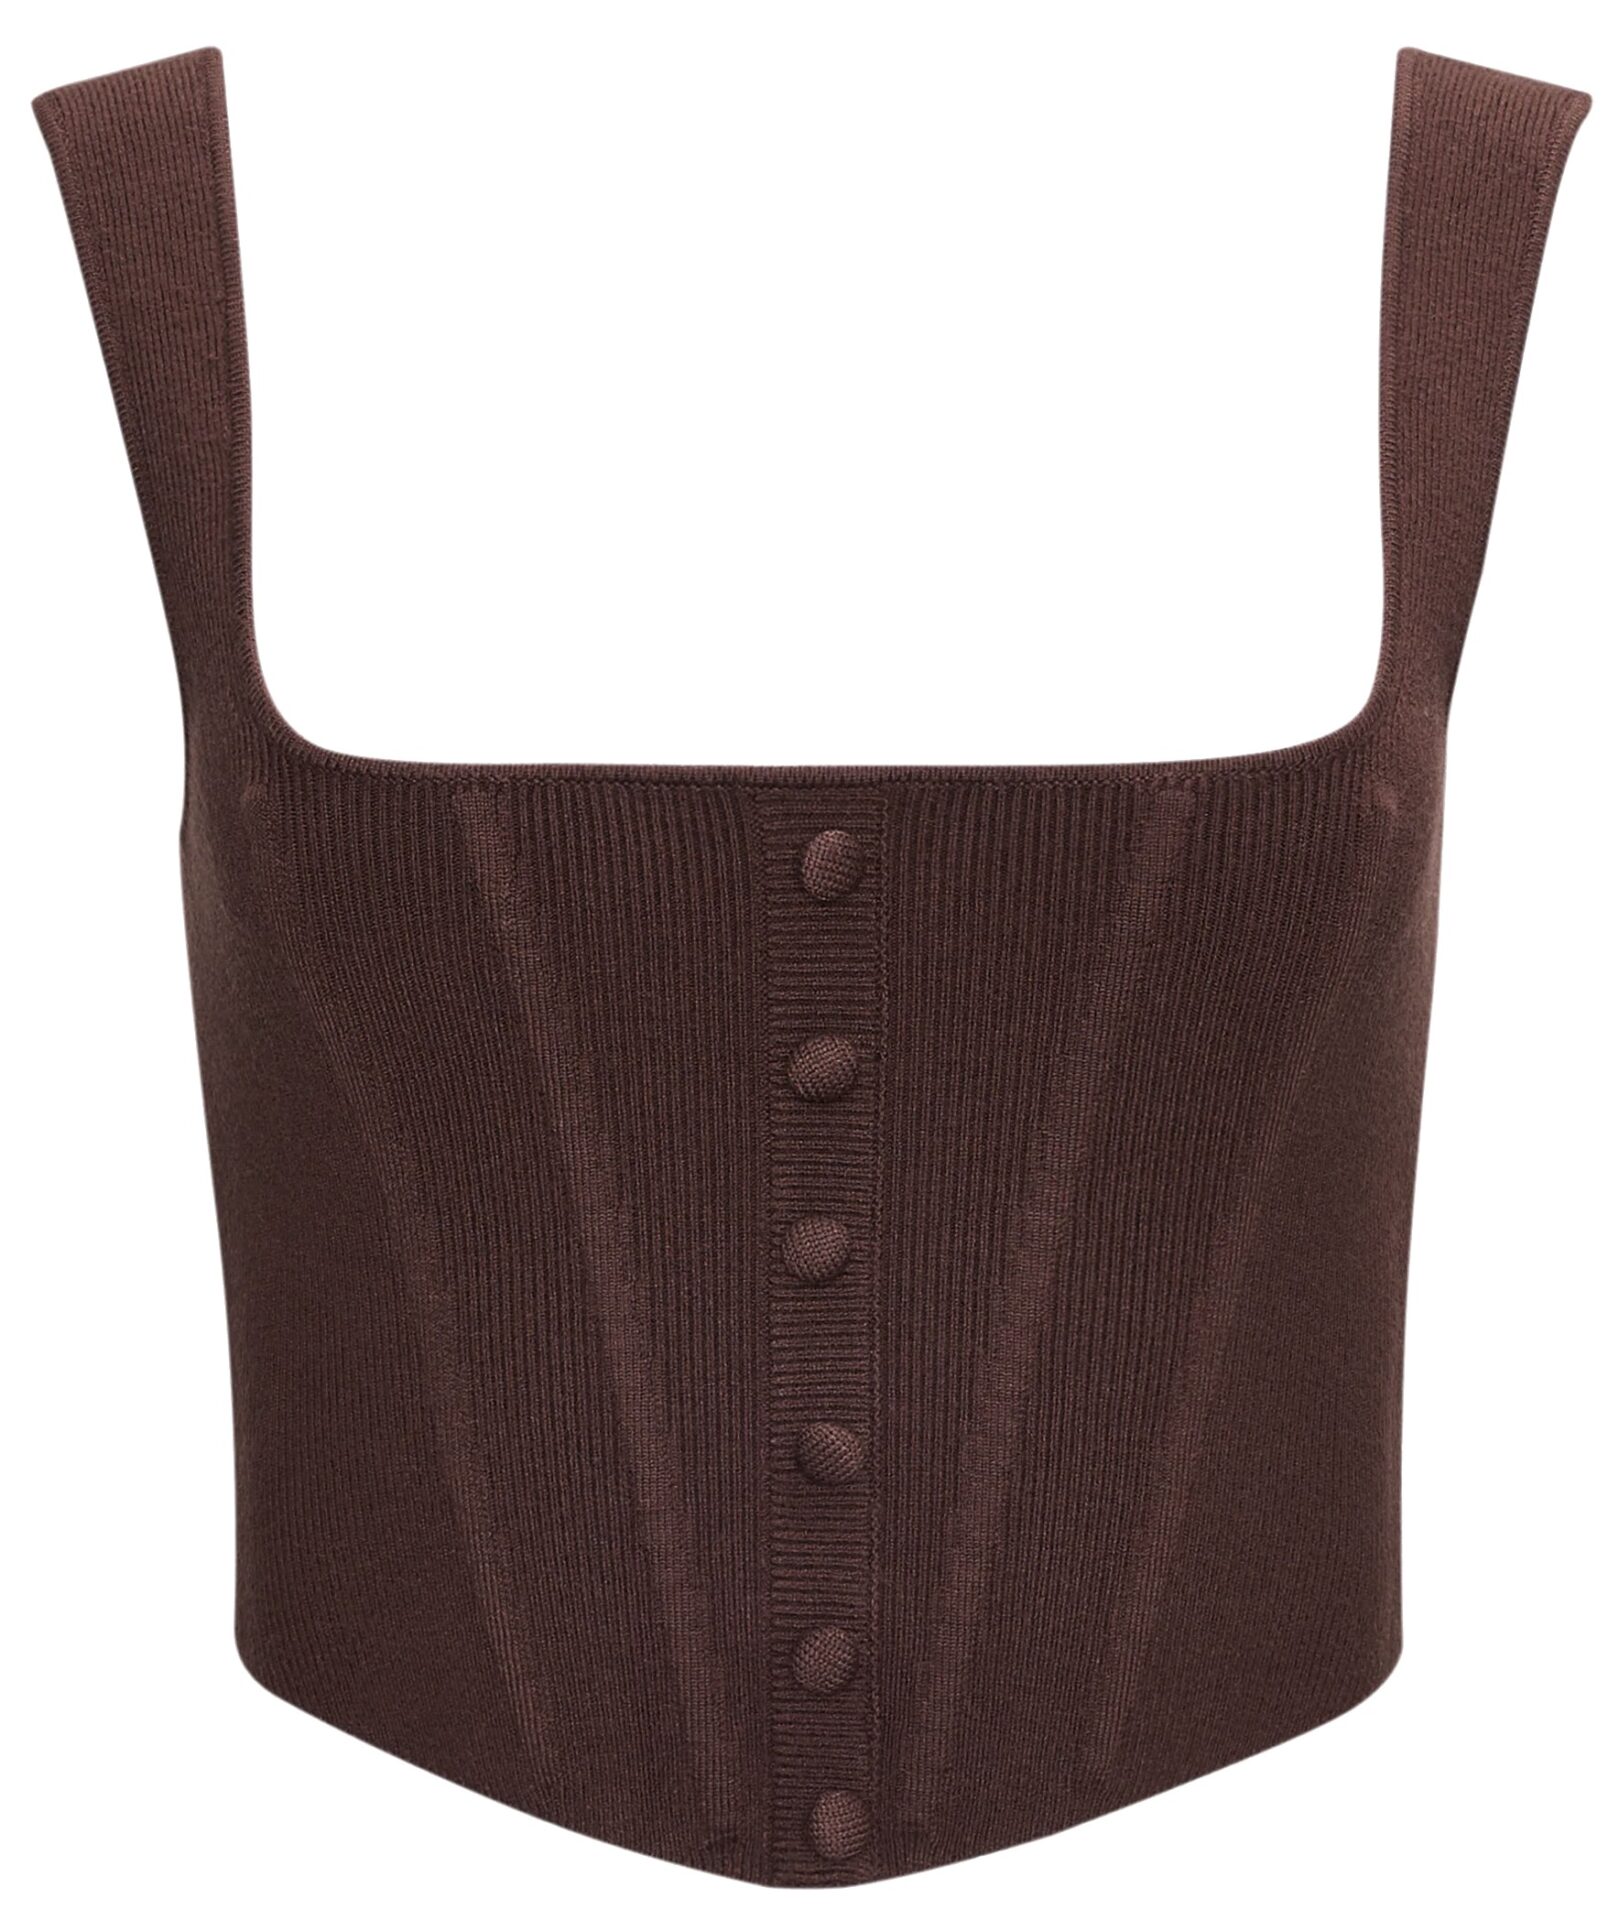 Corset (Chocolate Brown) | style